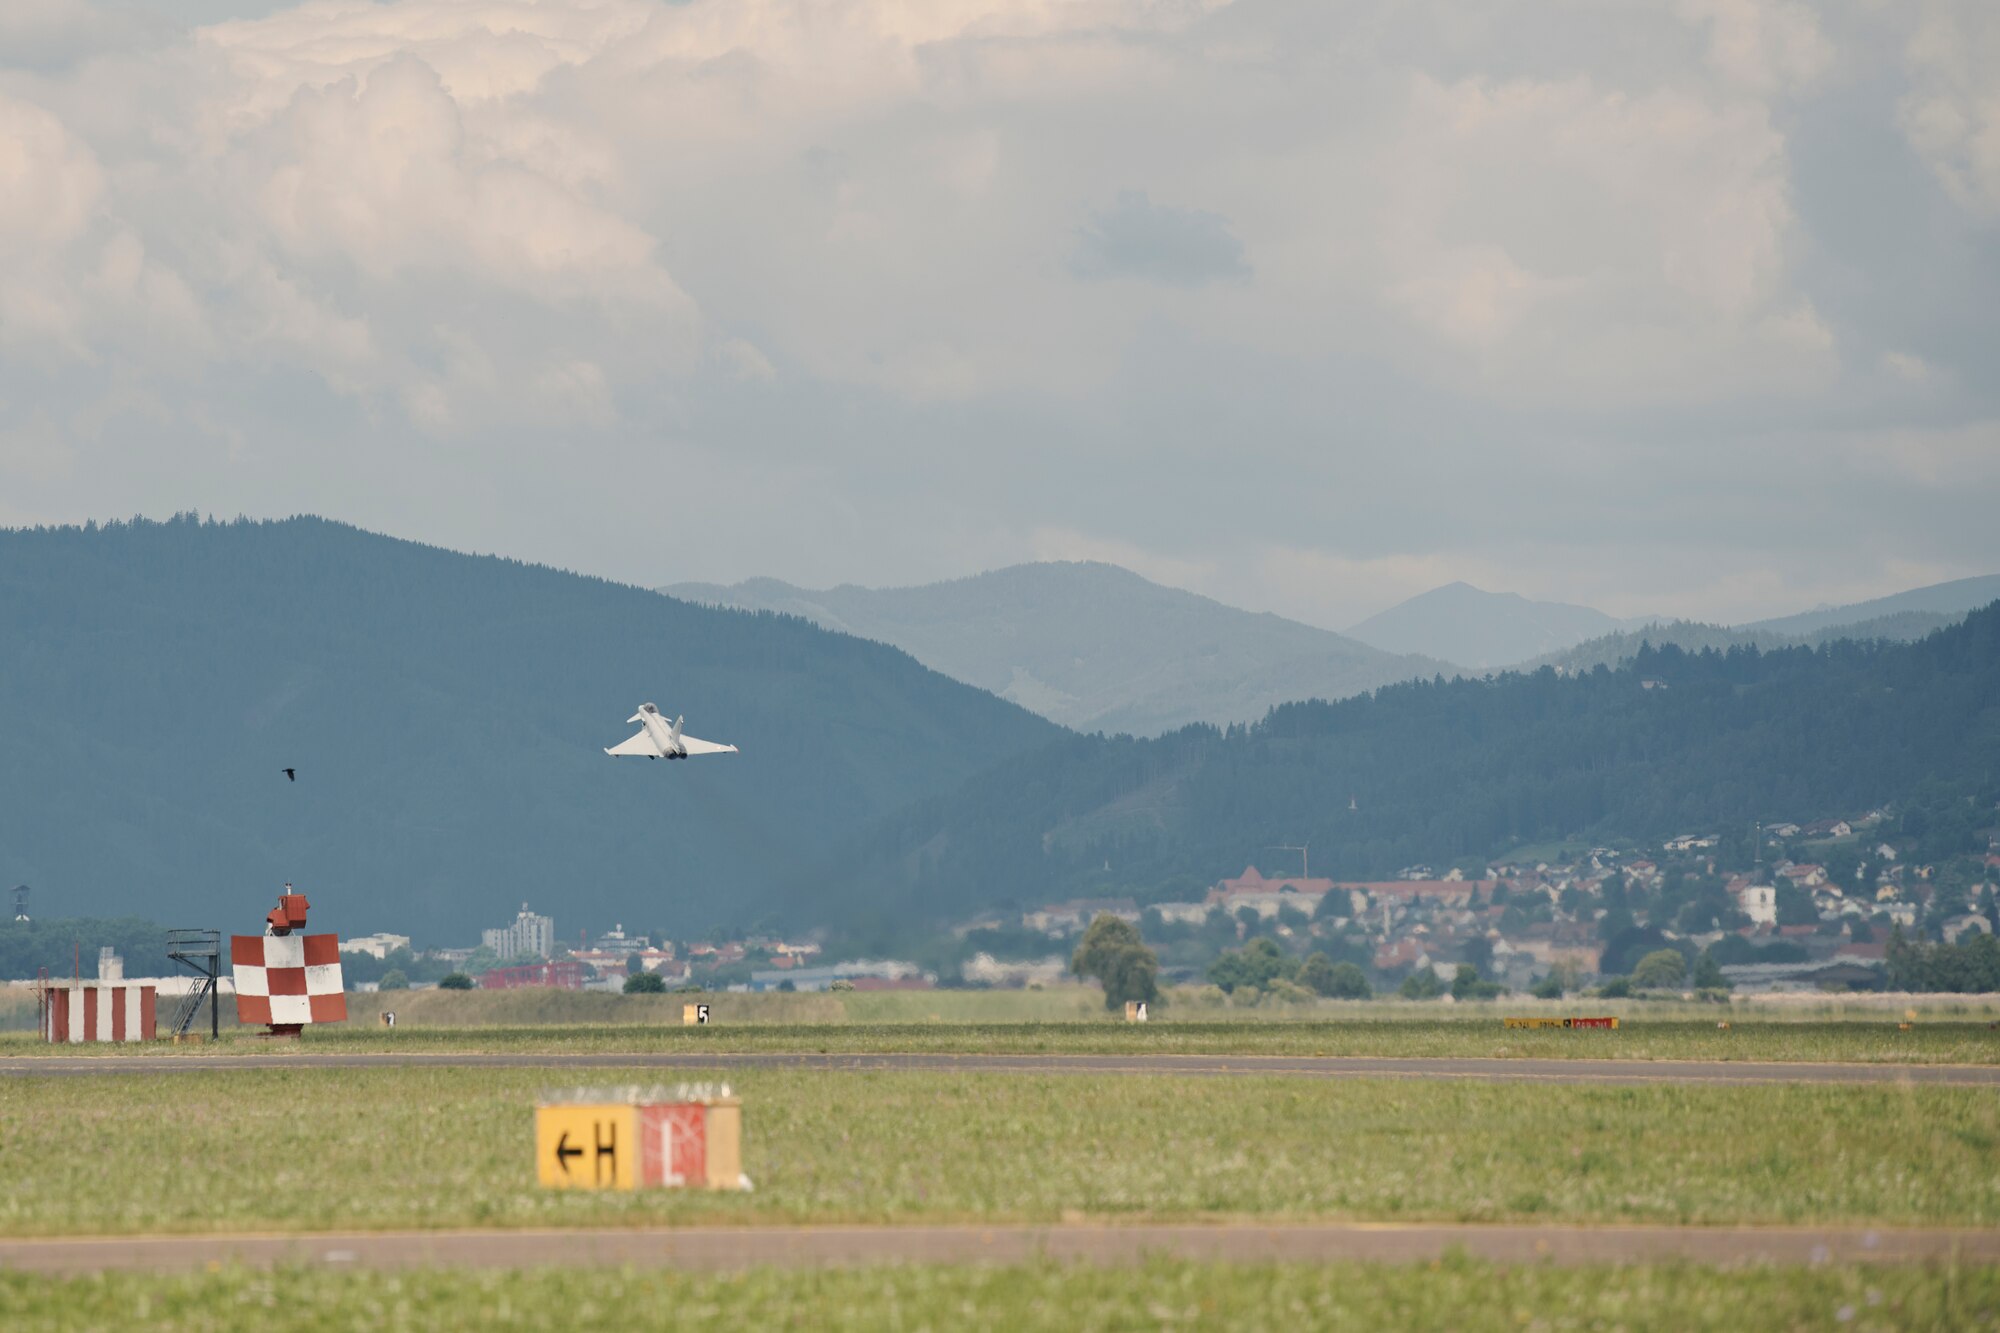 Photo of a Eurofighter Typhoons from the Austrian Air Force's Airspace Surveillance Wing, taking off Hinterstoisser Air Base for the first ever training sortie between Vermont and Austria since signing their State Partnership Program agreement, Zeltweg, Austria, June 17, 2023.